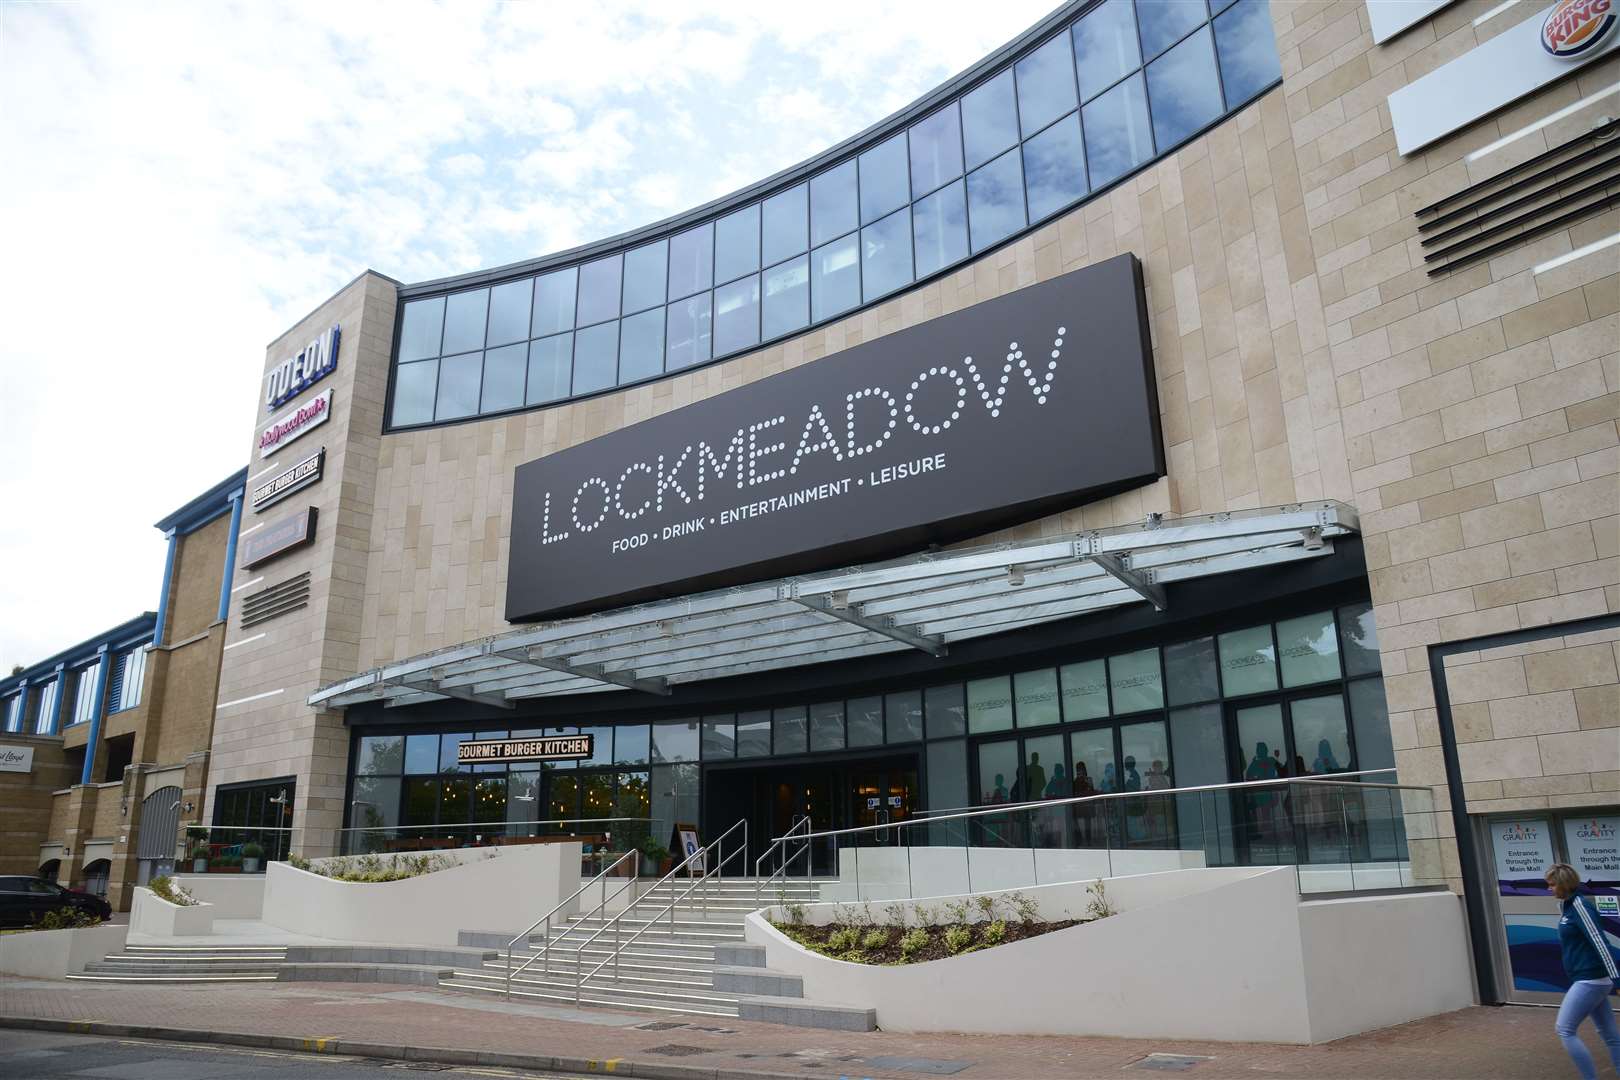 The Odeon at Lockmeadow in Maidstone is now a vaccination centre